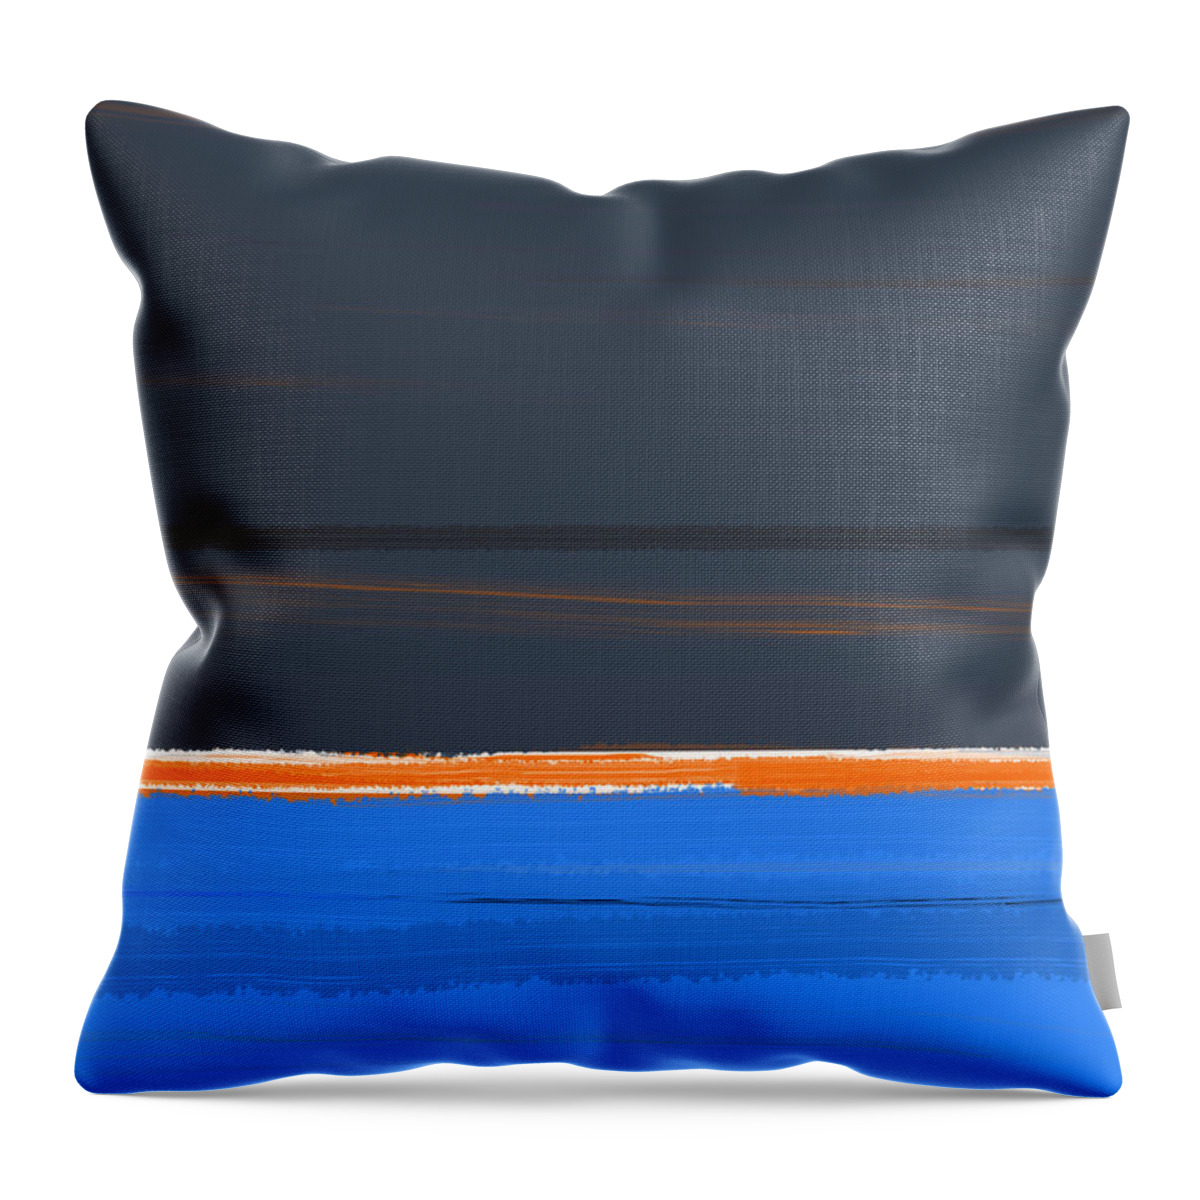 Abstract Throw Pillow featuring the painting Stripe Orange by Naxart Studio